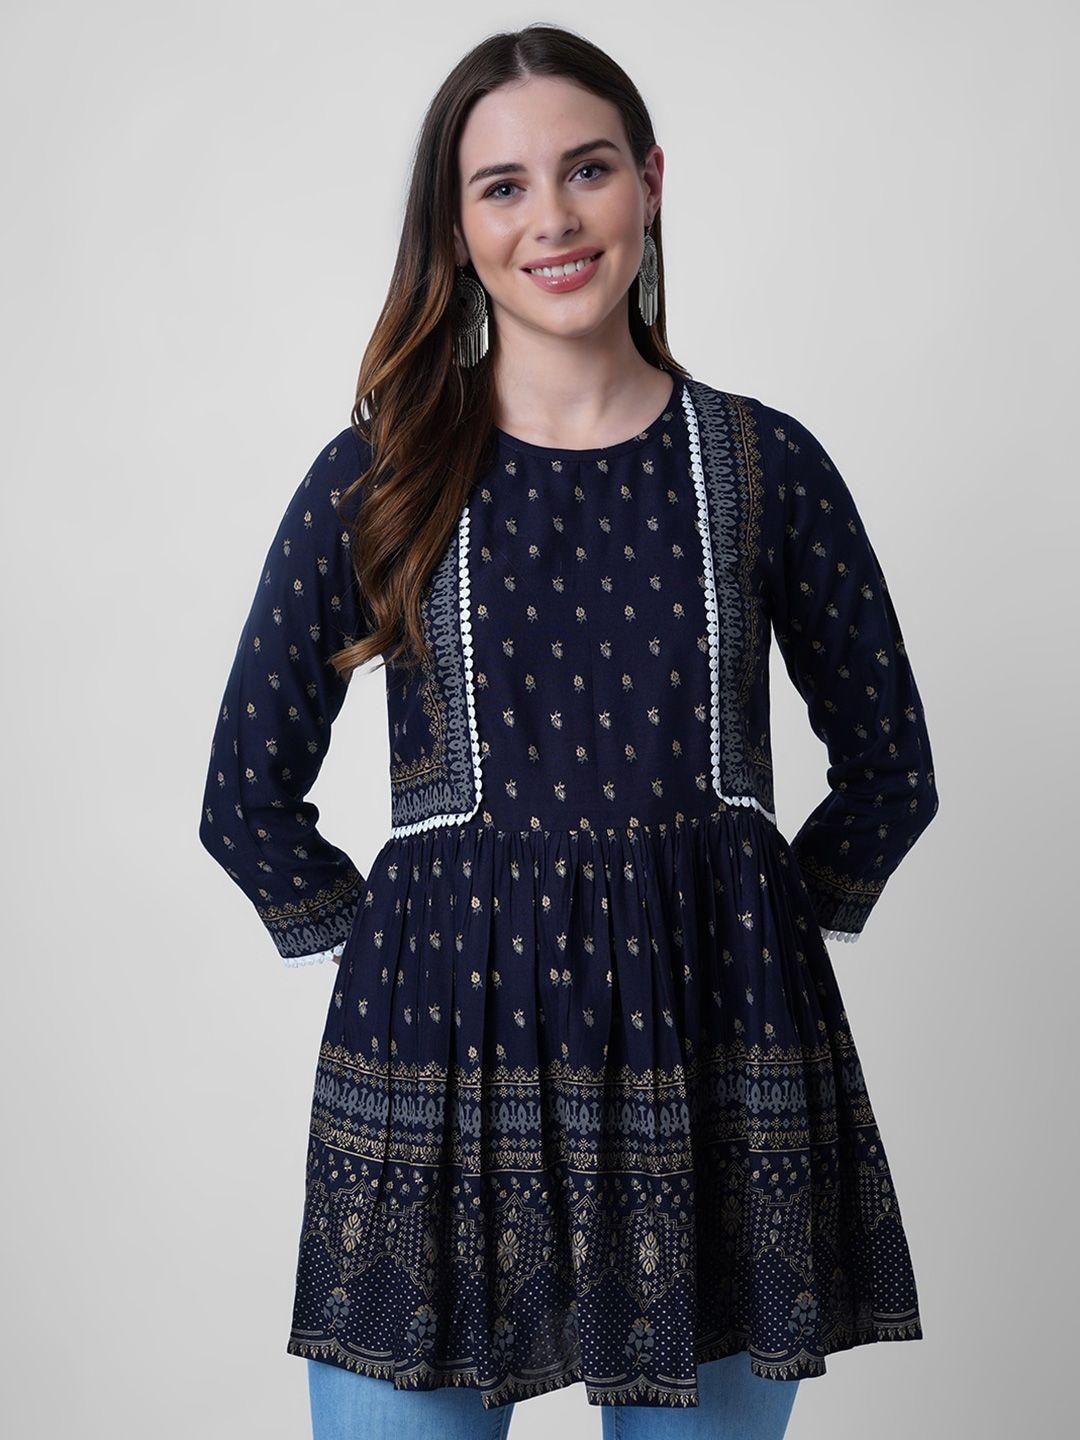 god bless navy blue & gold-toned printed with lace details top